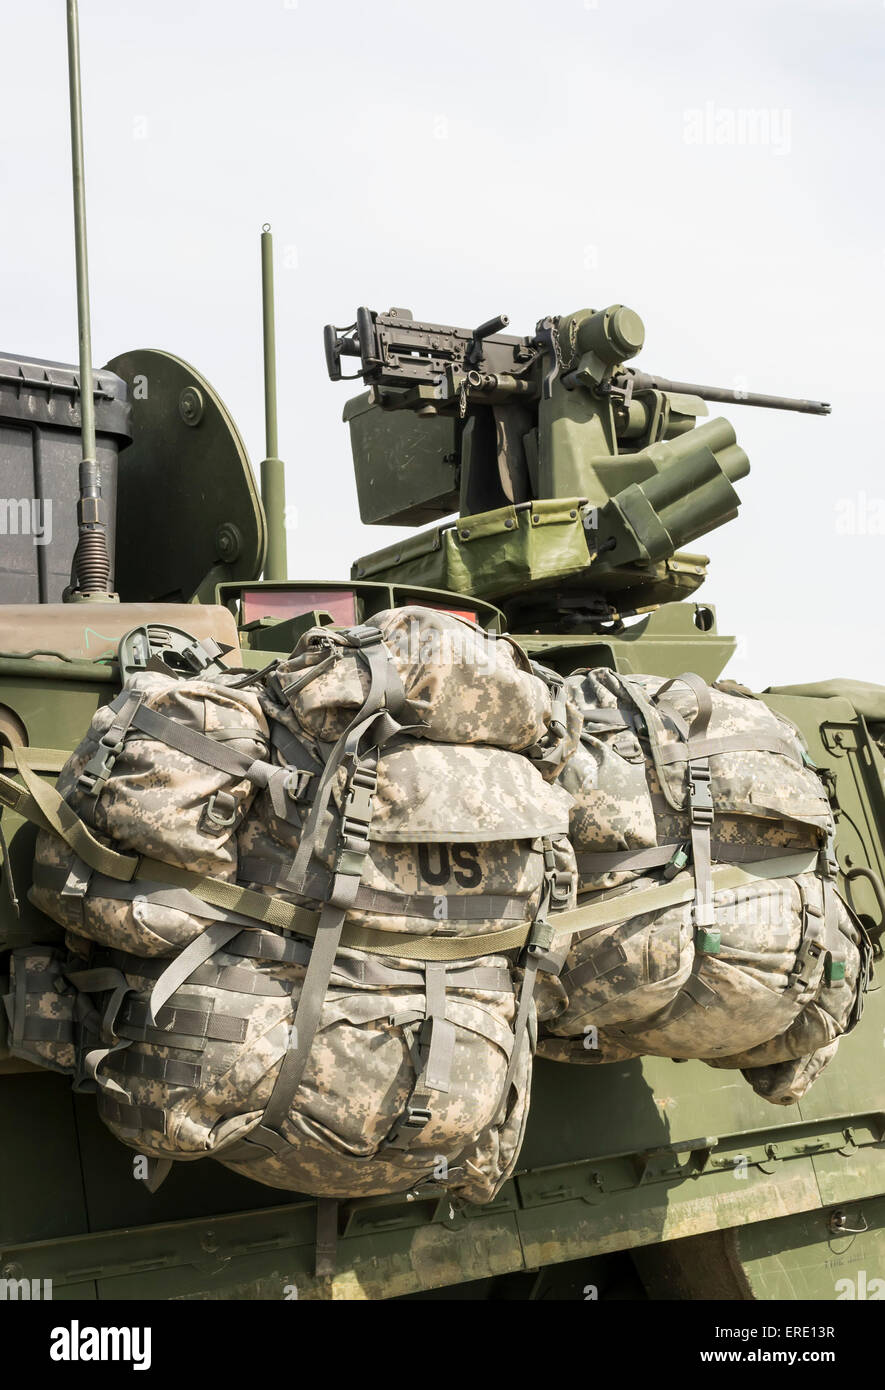 Two rucksacks currently belonging to U.S. army personnel attached to the side of an armored field vehicle Stock Photo